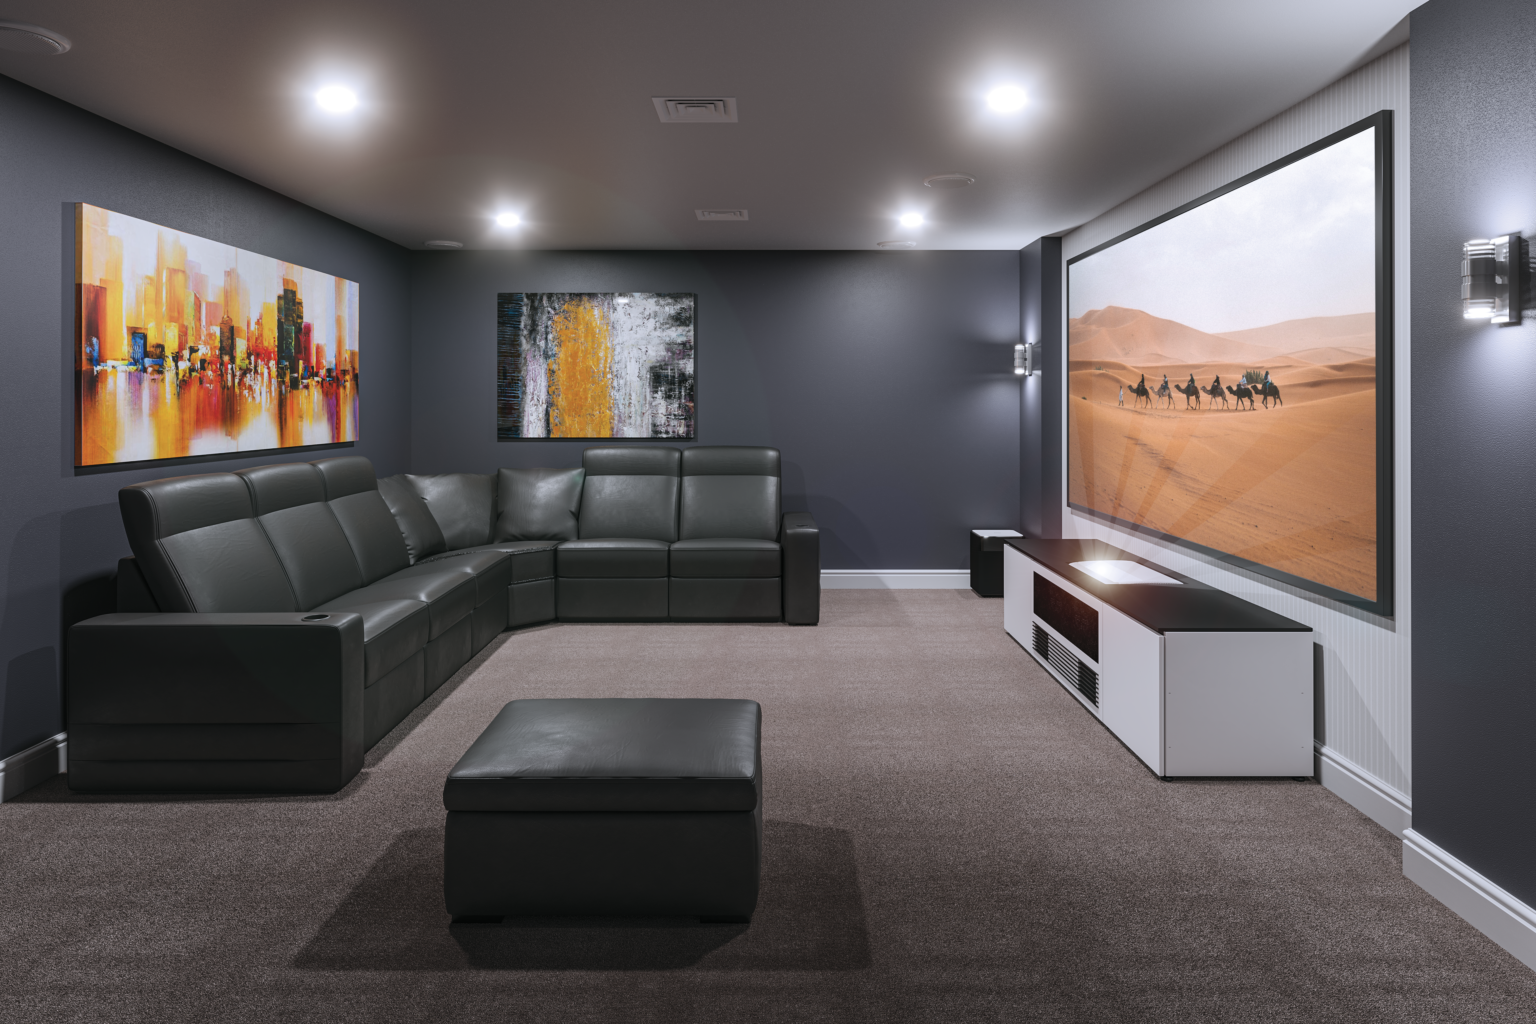 Home Theater Seating in New Jersey - Cine Acoustic provides Home Theater seating Installation in Morris County, Essex County, Middlesex County, Passaic County, Bergen County, Somerset County, Hudson County, and Monmouth County New Jersey.